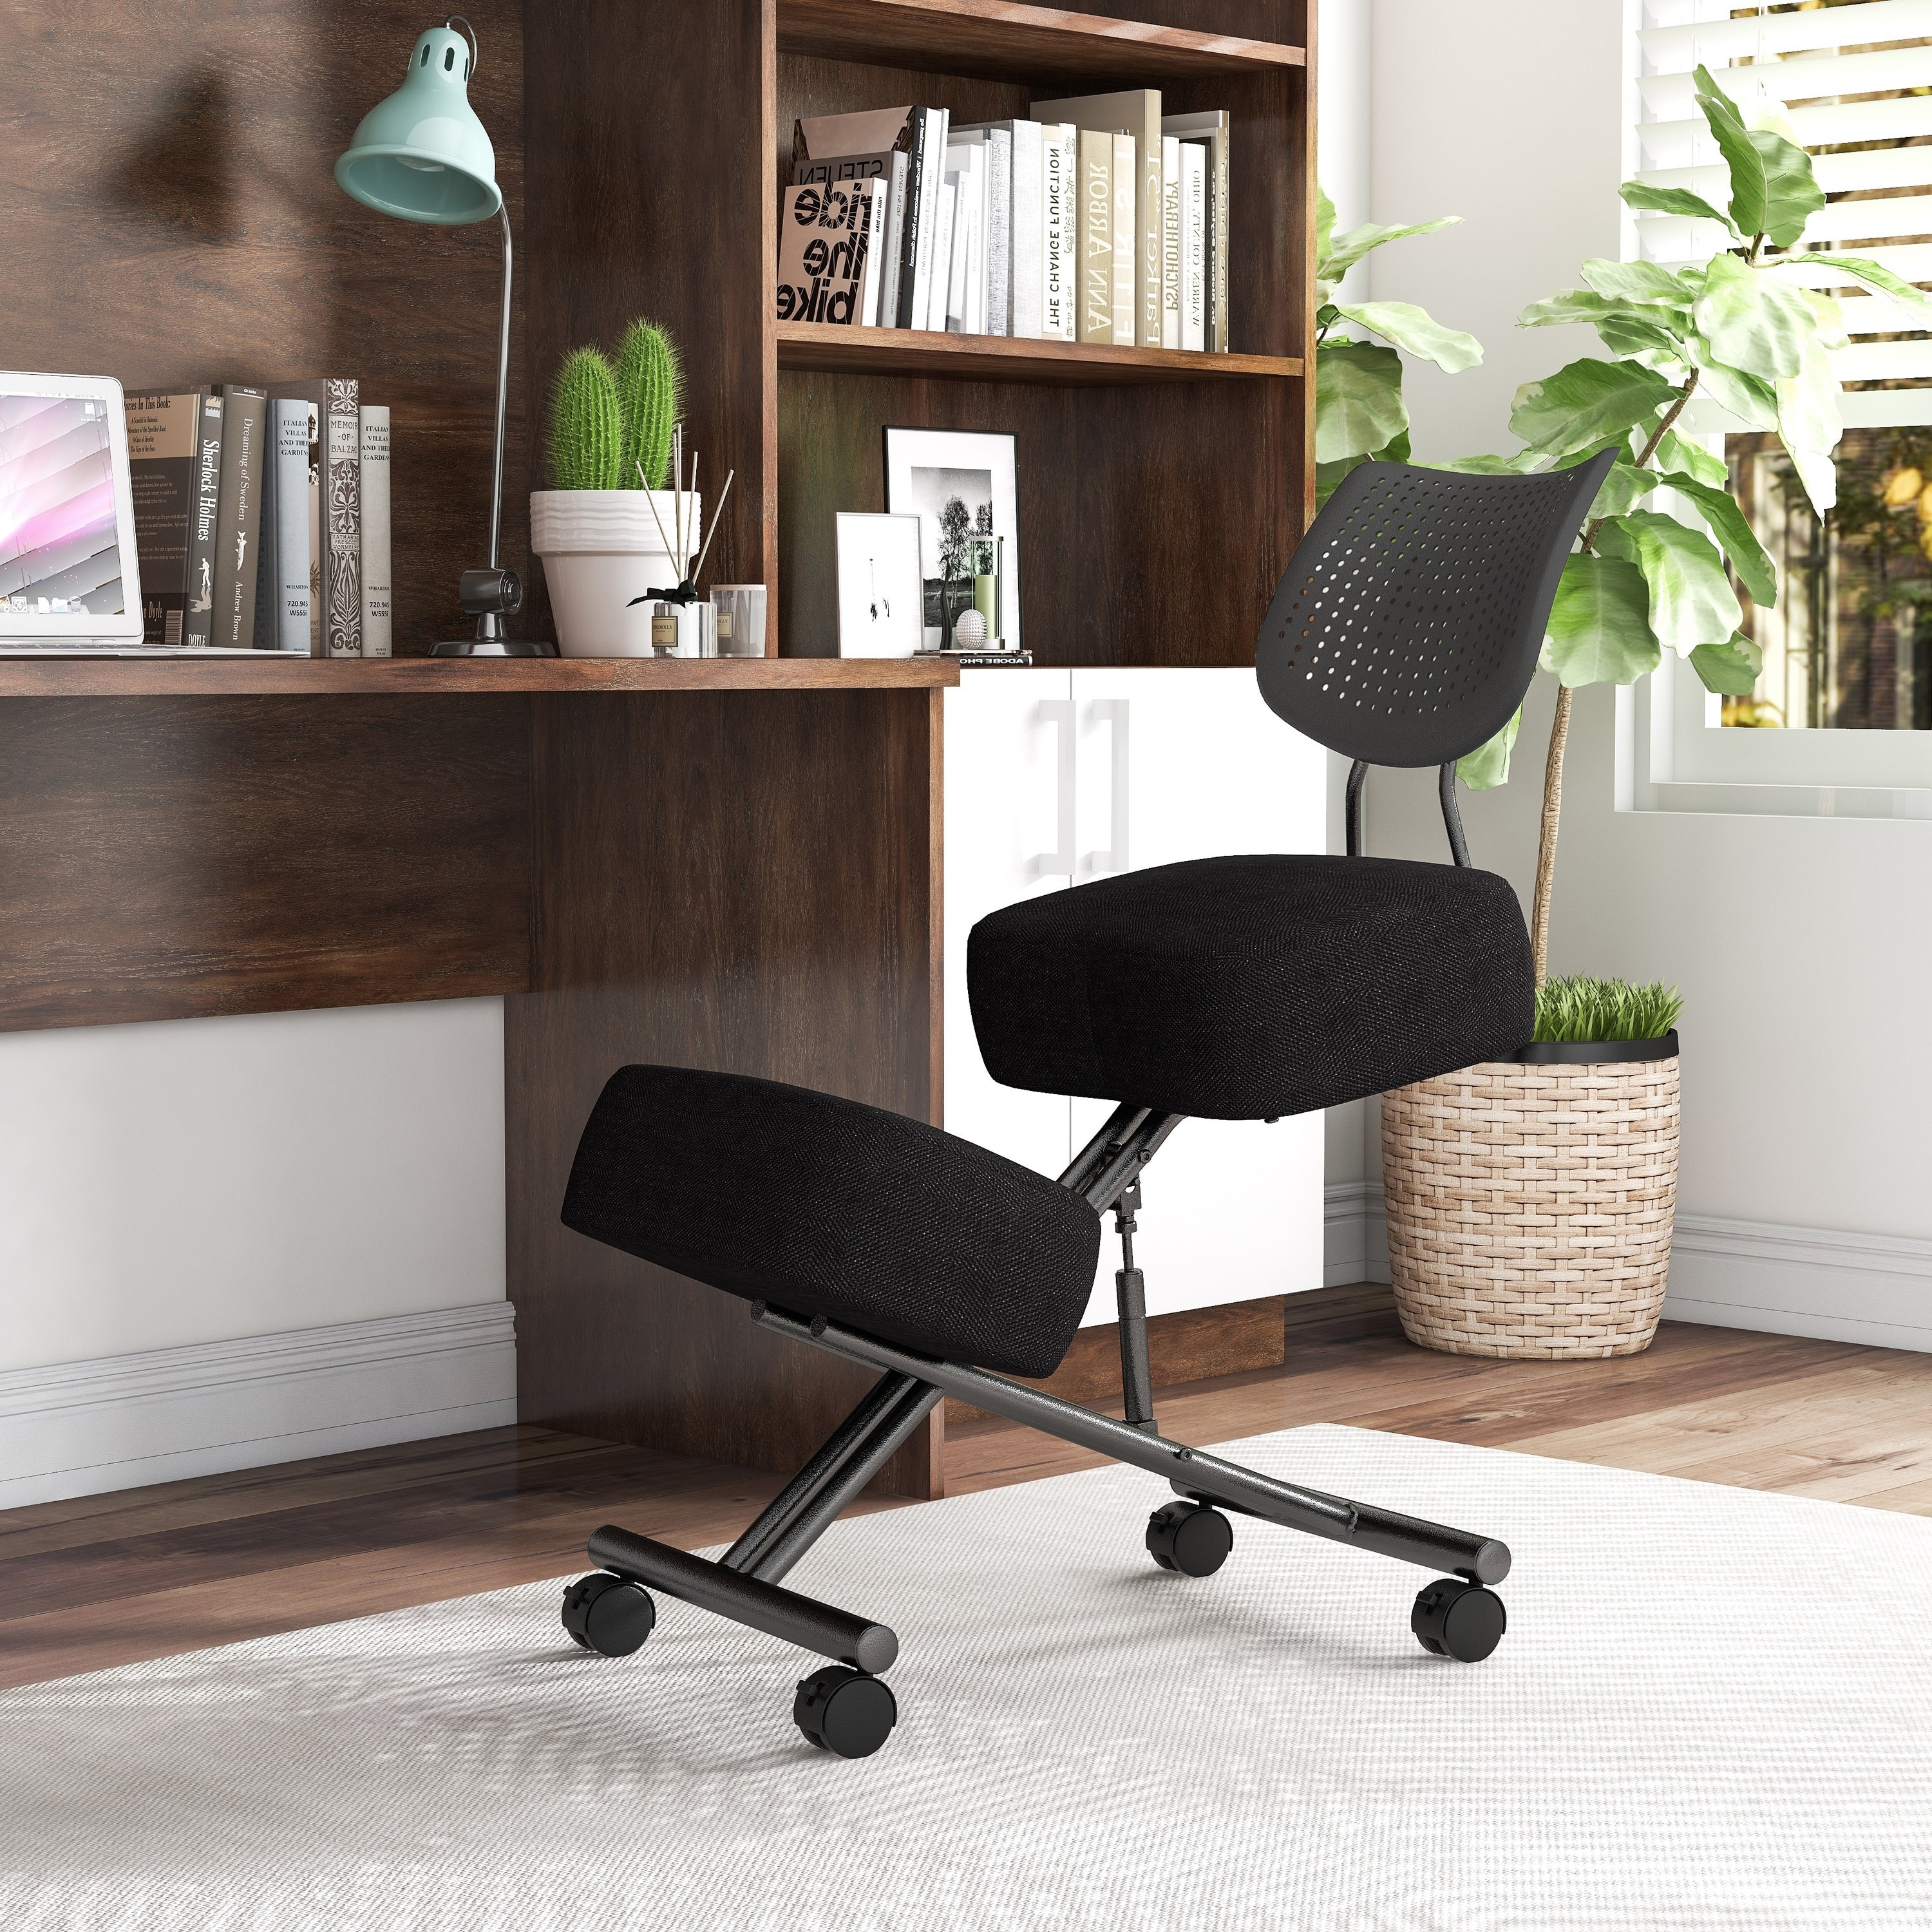 https://ak1.ostkcdn.com/images/products/is/images/direct/b2ee22516345981f586c310539ead11601a4328b/Furniture-of-America-Kade-Height-Adjustable-Desk-Chair.jpg